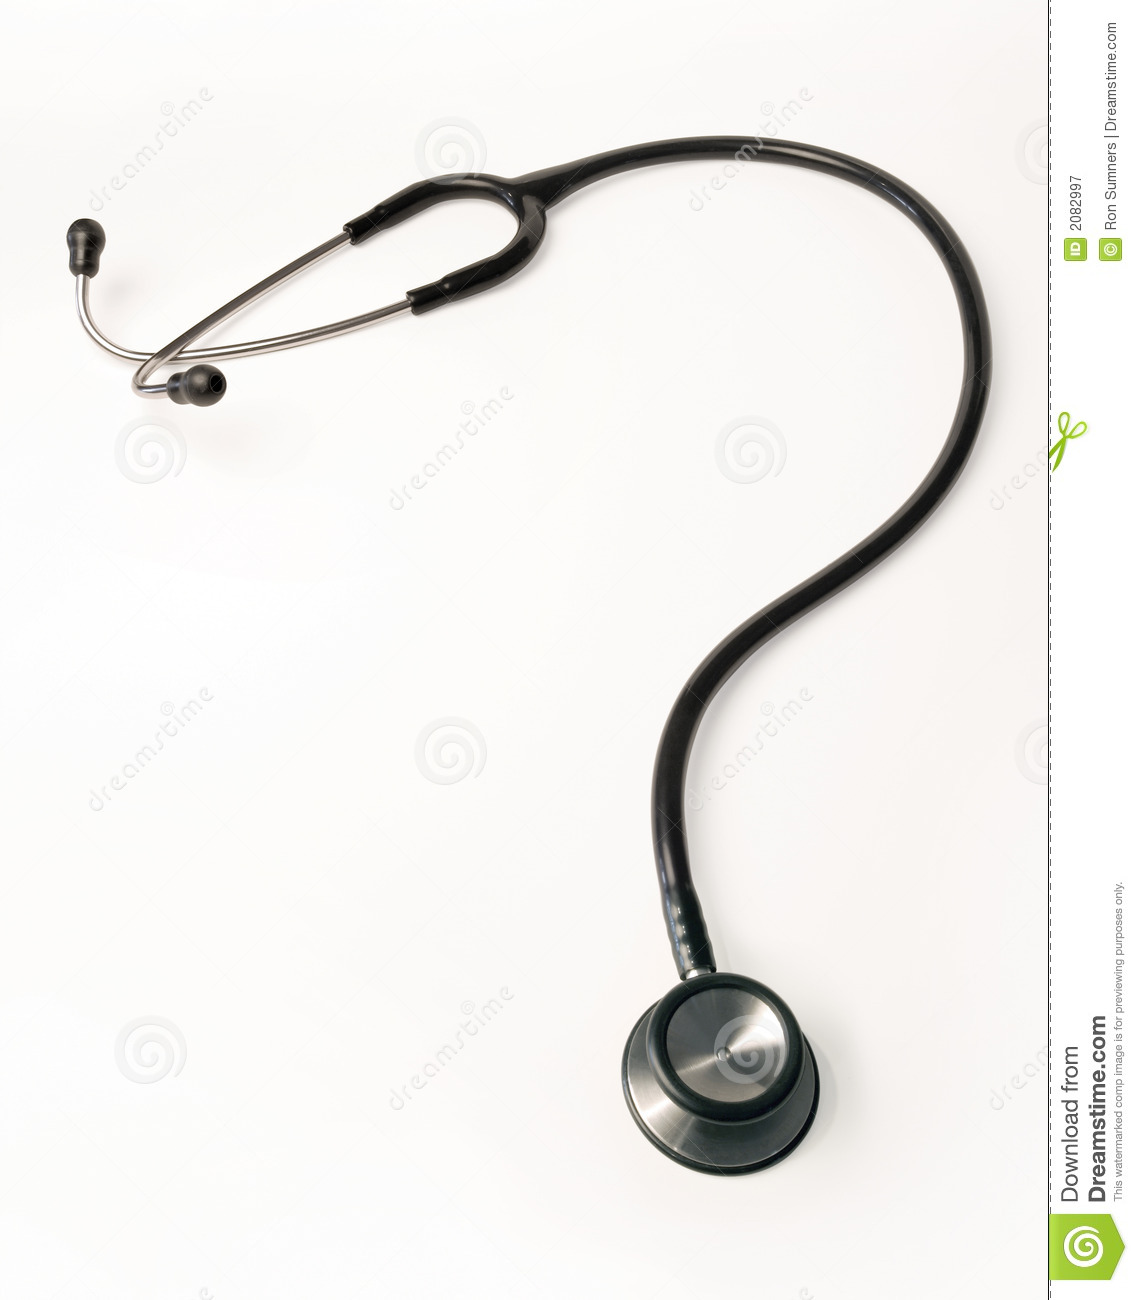 Stethoscope In The Shape Of A Question Mark  Clipping Path Included